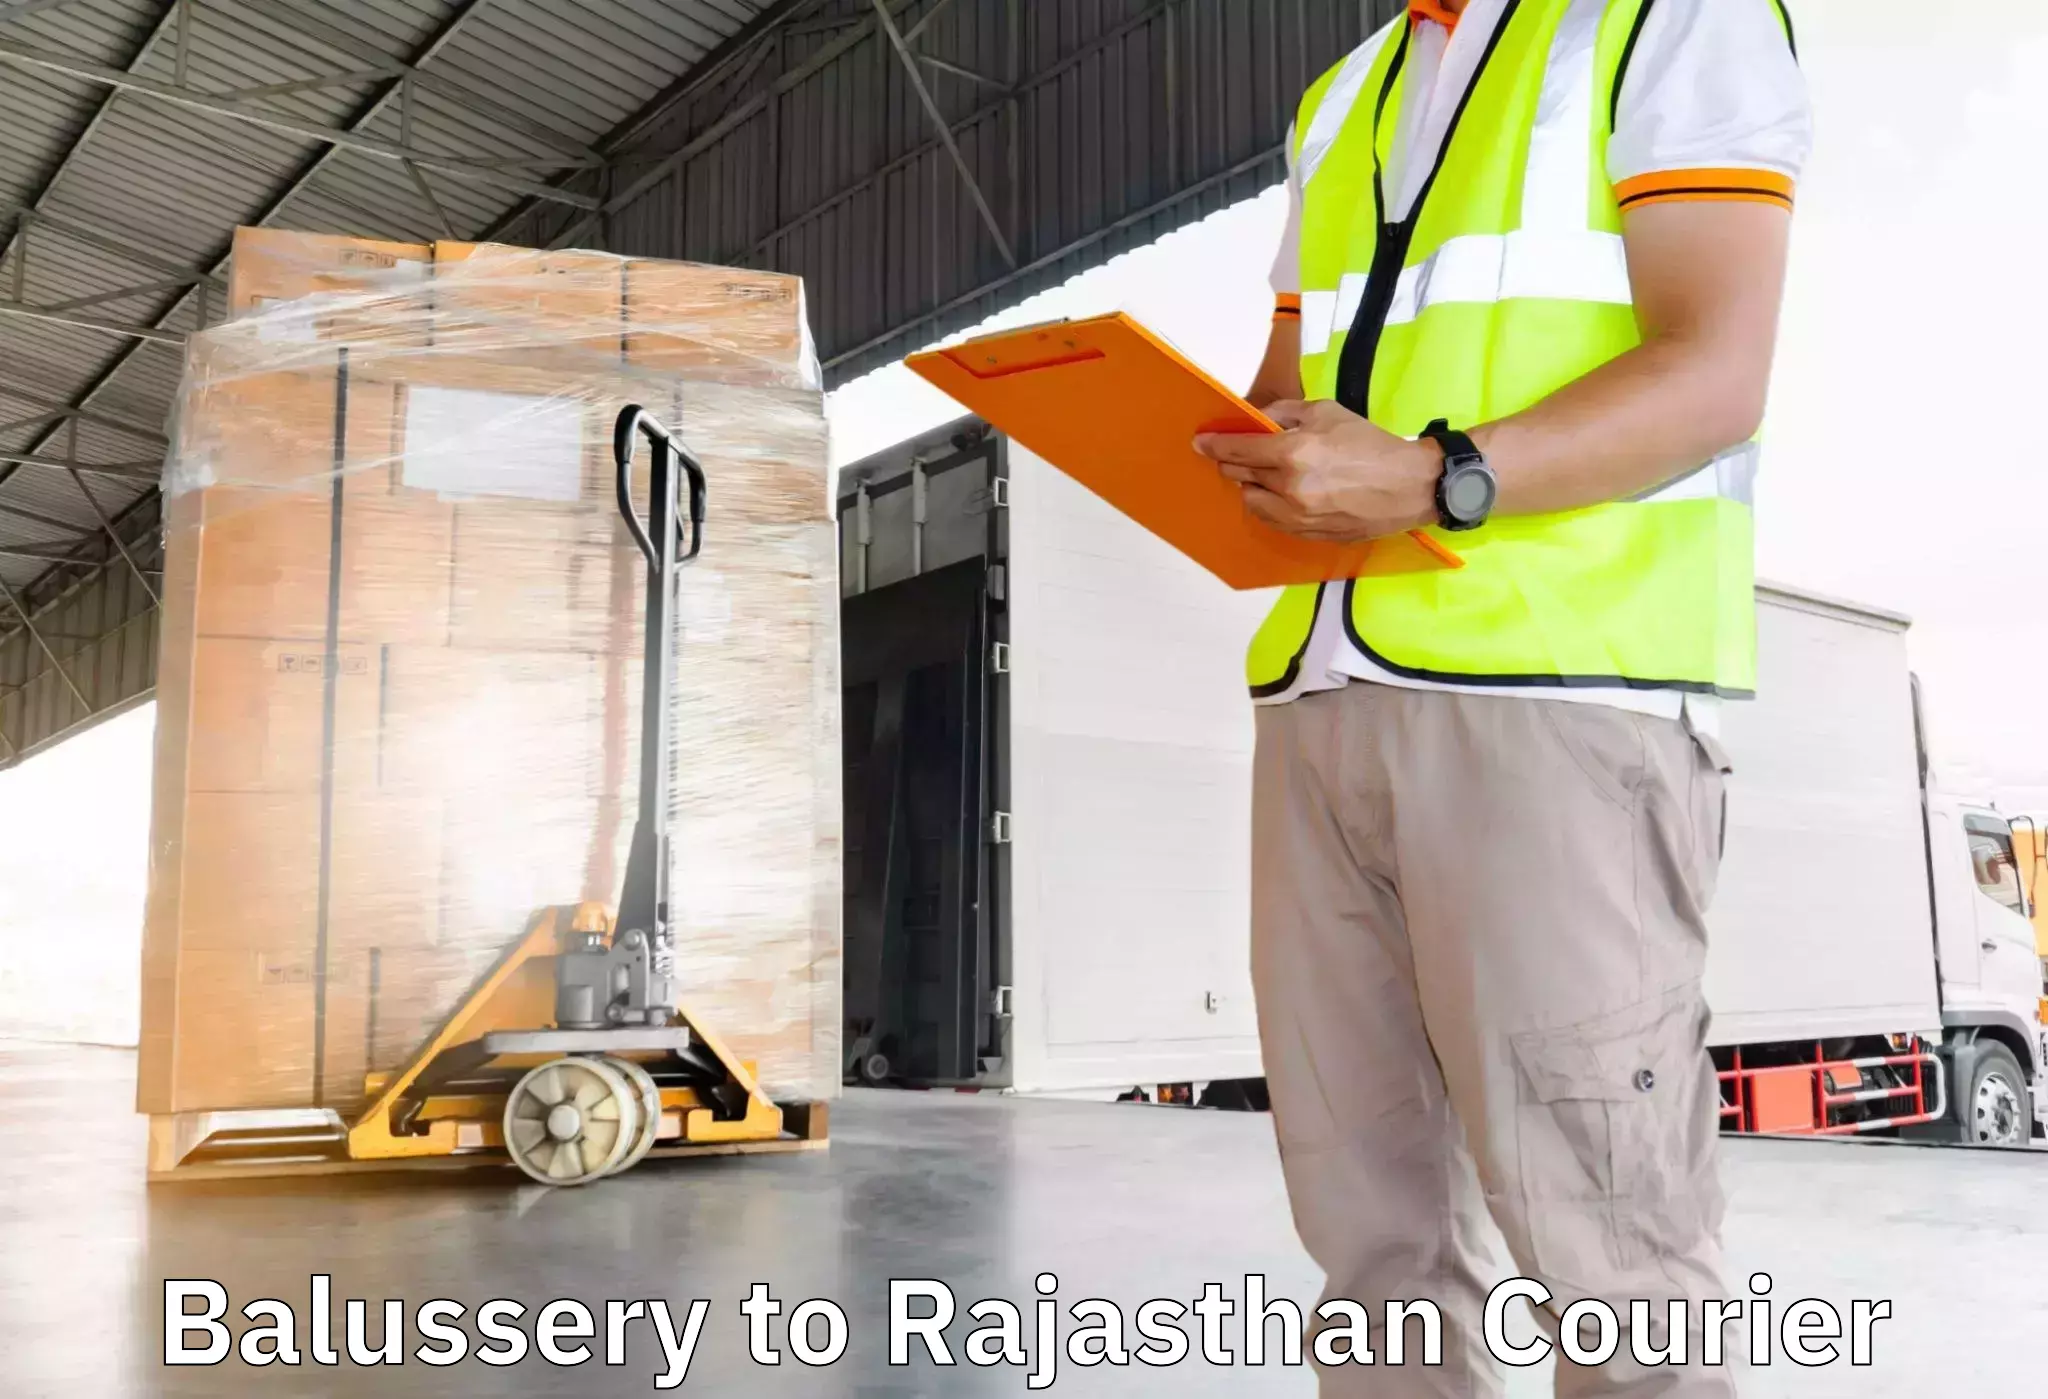 Furniture transport experts Balussery to Makrana